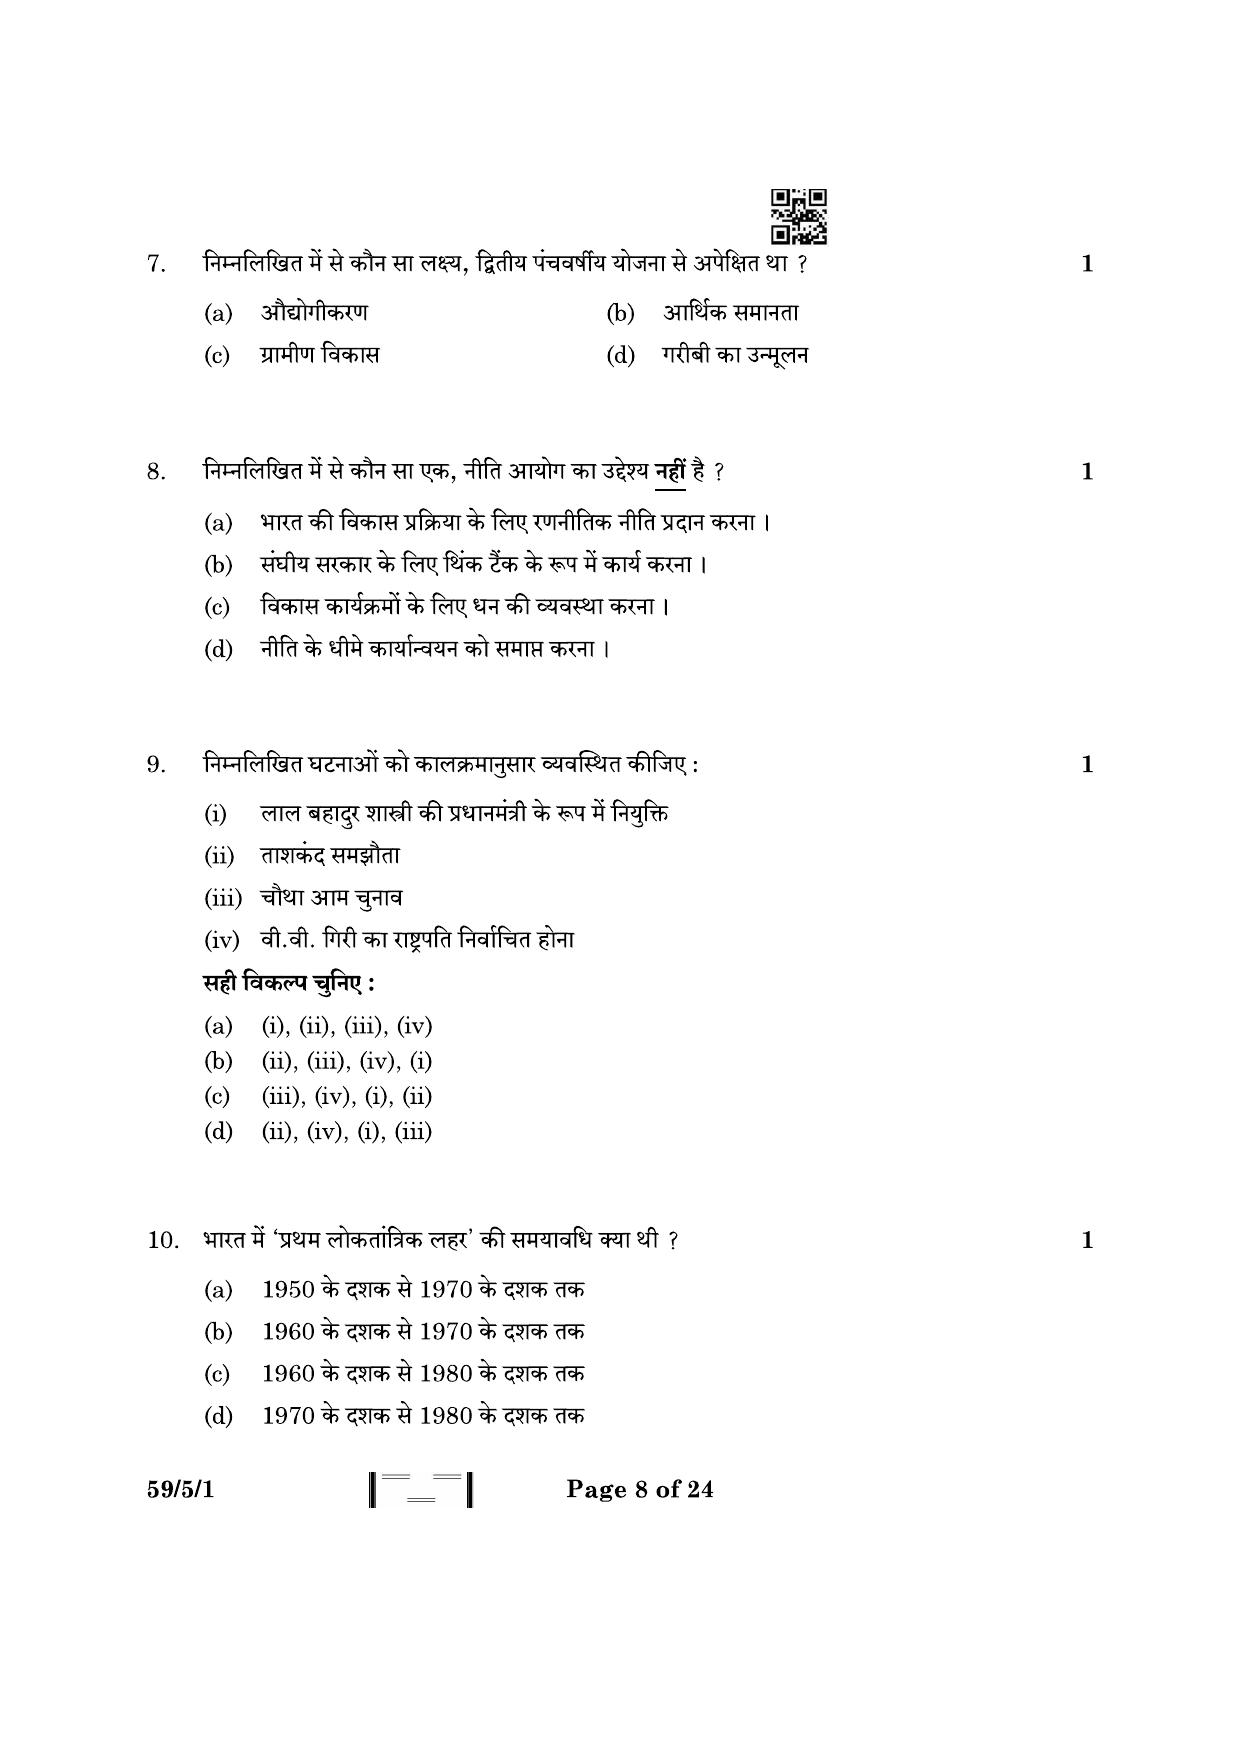 CBSE Class 12 59-5-1 Political Science 2023 Question Paper - Page 8